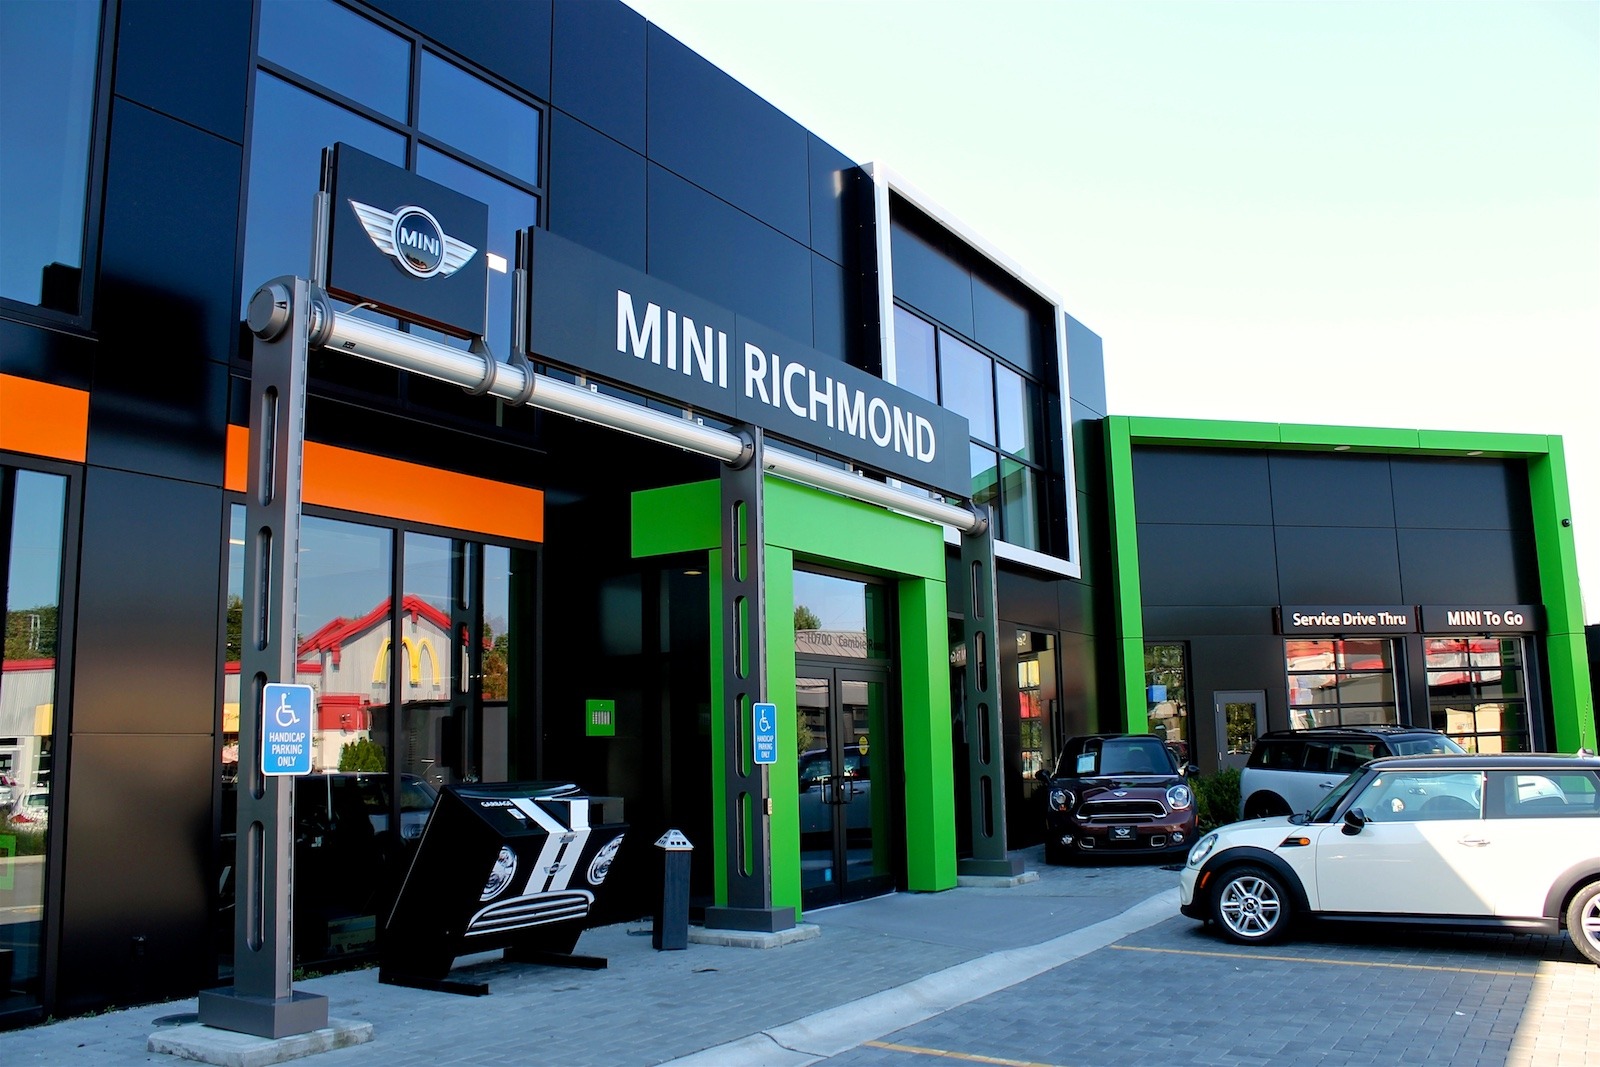 Robertson-Walls-Ceilings-Completed-Projects-Luxury-Car-Dealerships-Mini-Richmond-4 Completed Projects